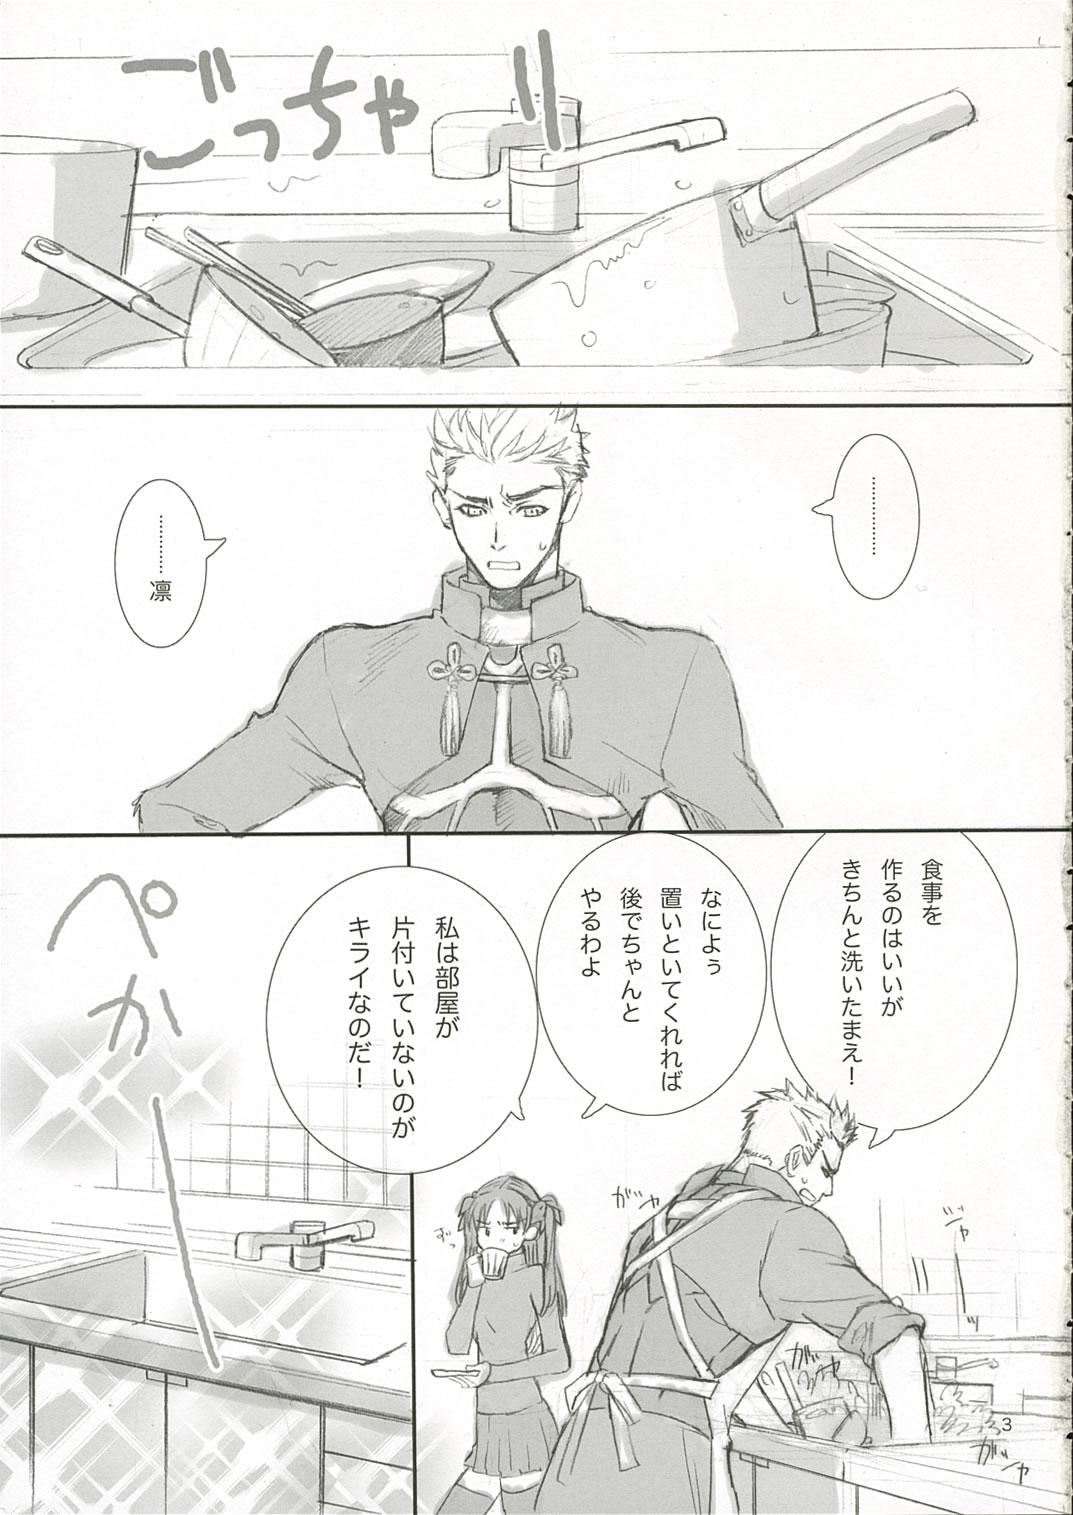 Transgender Candy - Fate stay night Por - Page 2